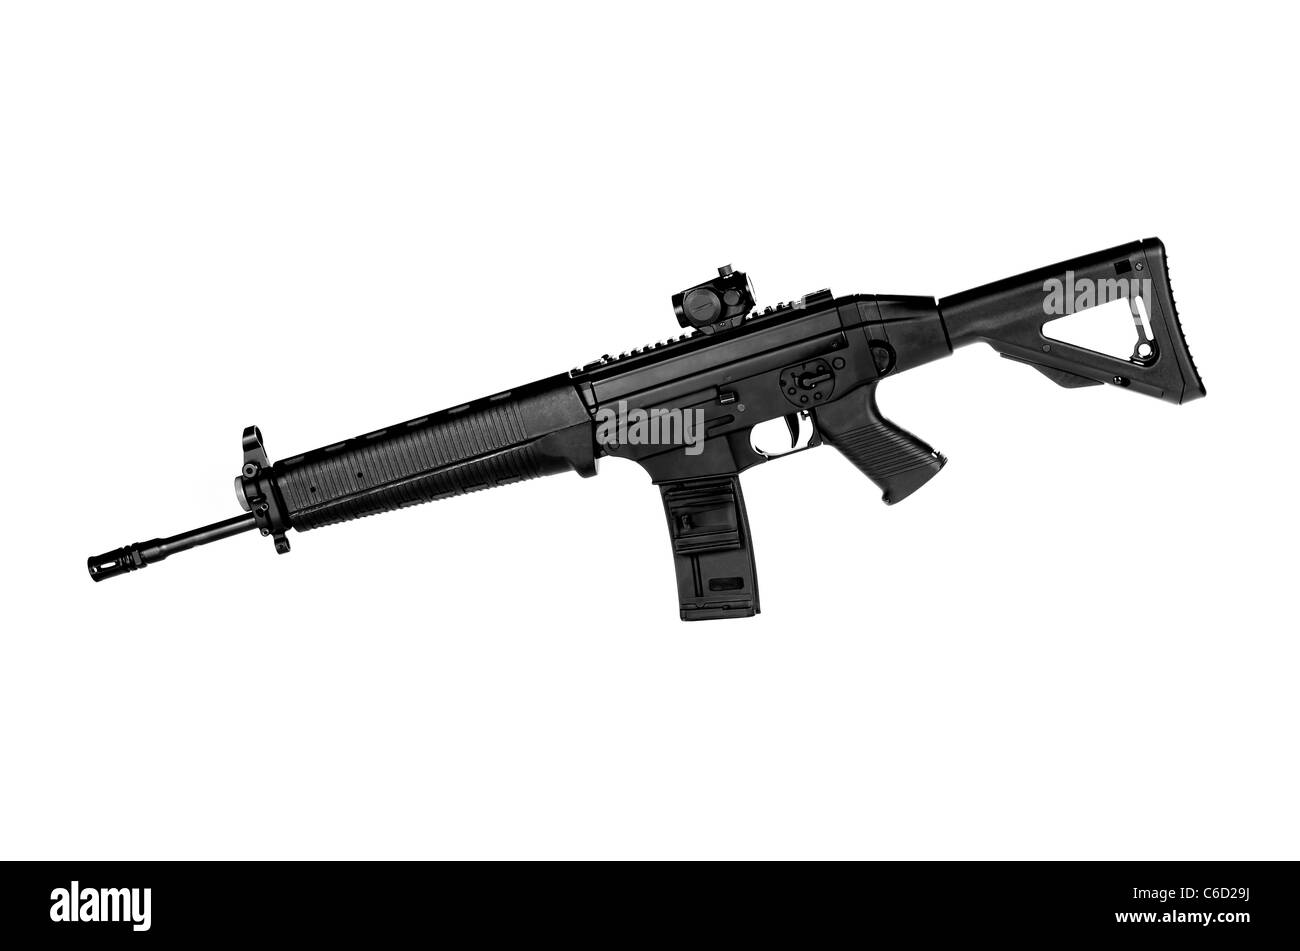 Image of a .556 NATO Tactical Rifle on a white background Stock Photo